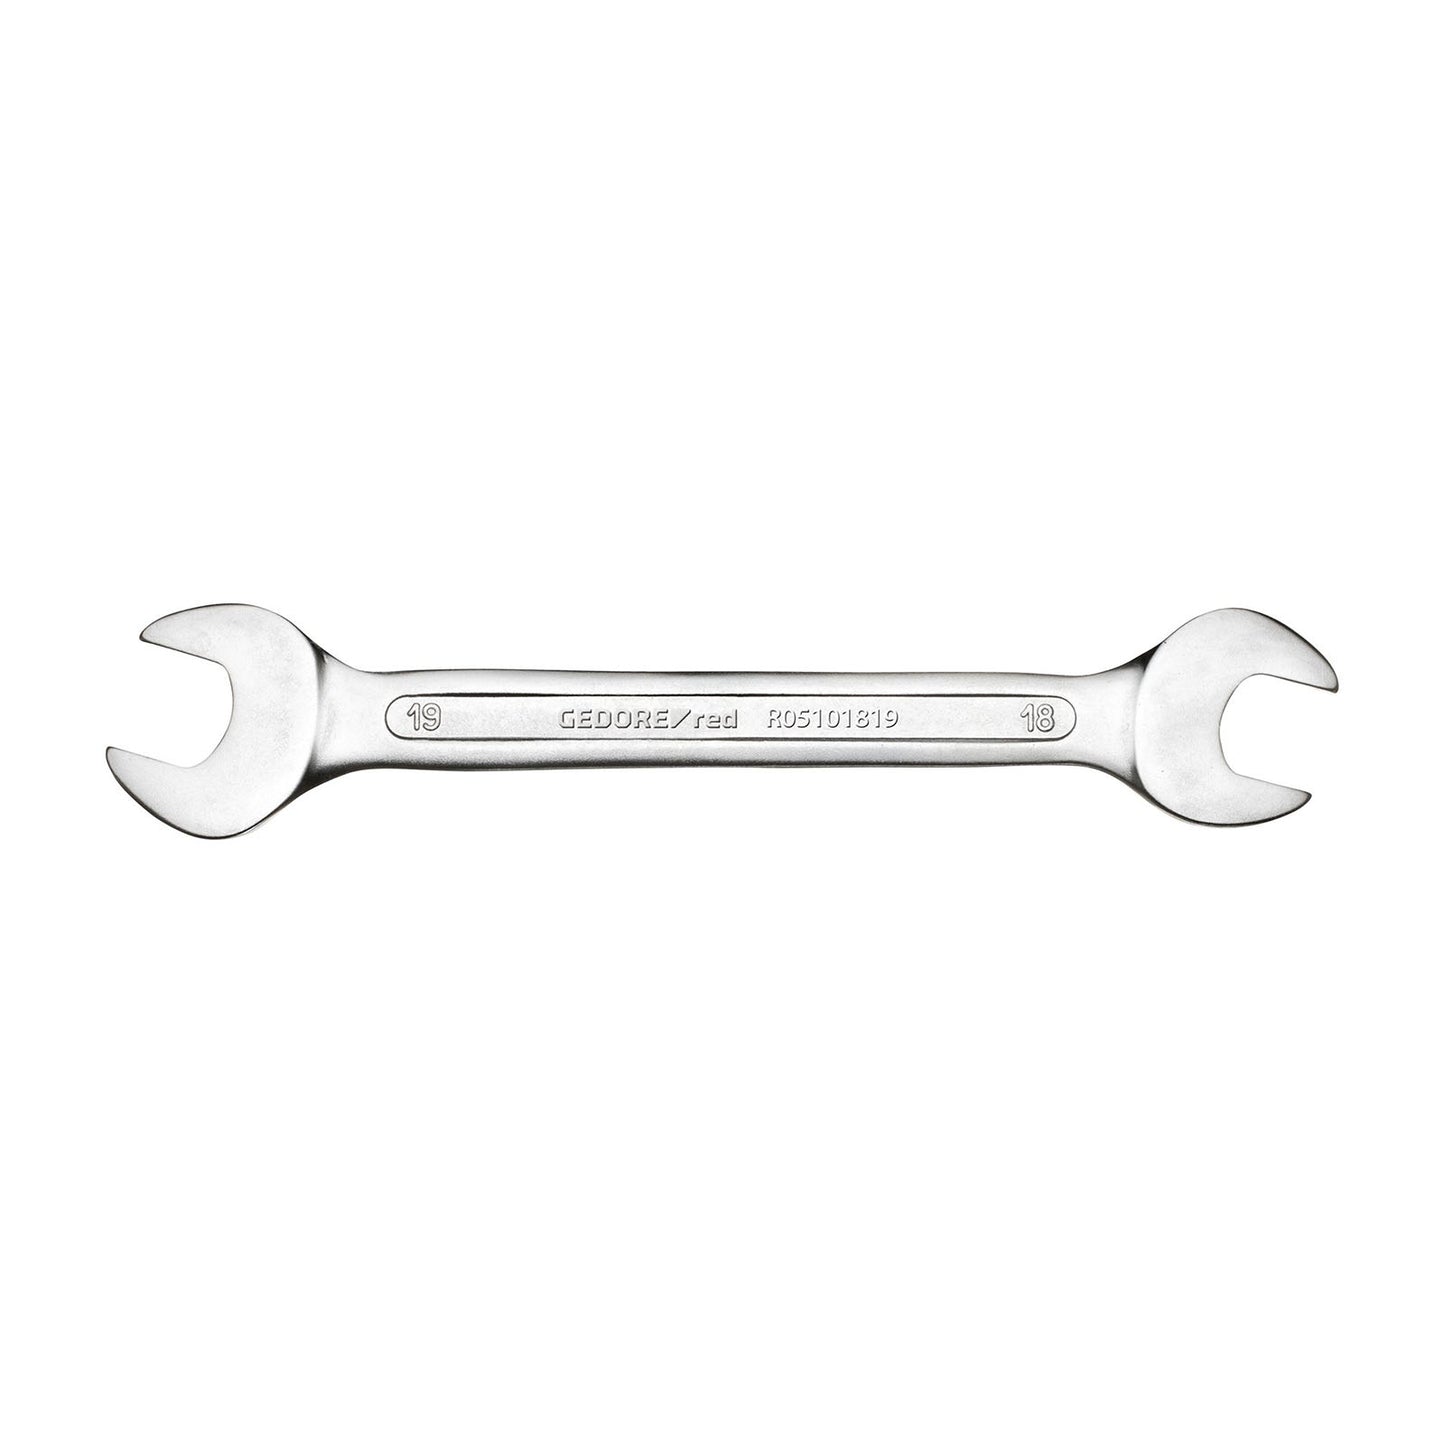 GEDORE red R05102426 - Double open end wrench 24x26 mm L=266 mm (3300949)